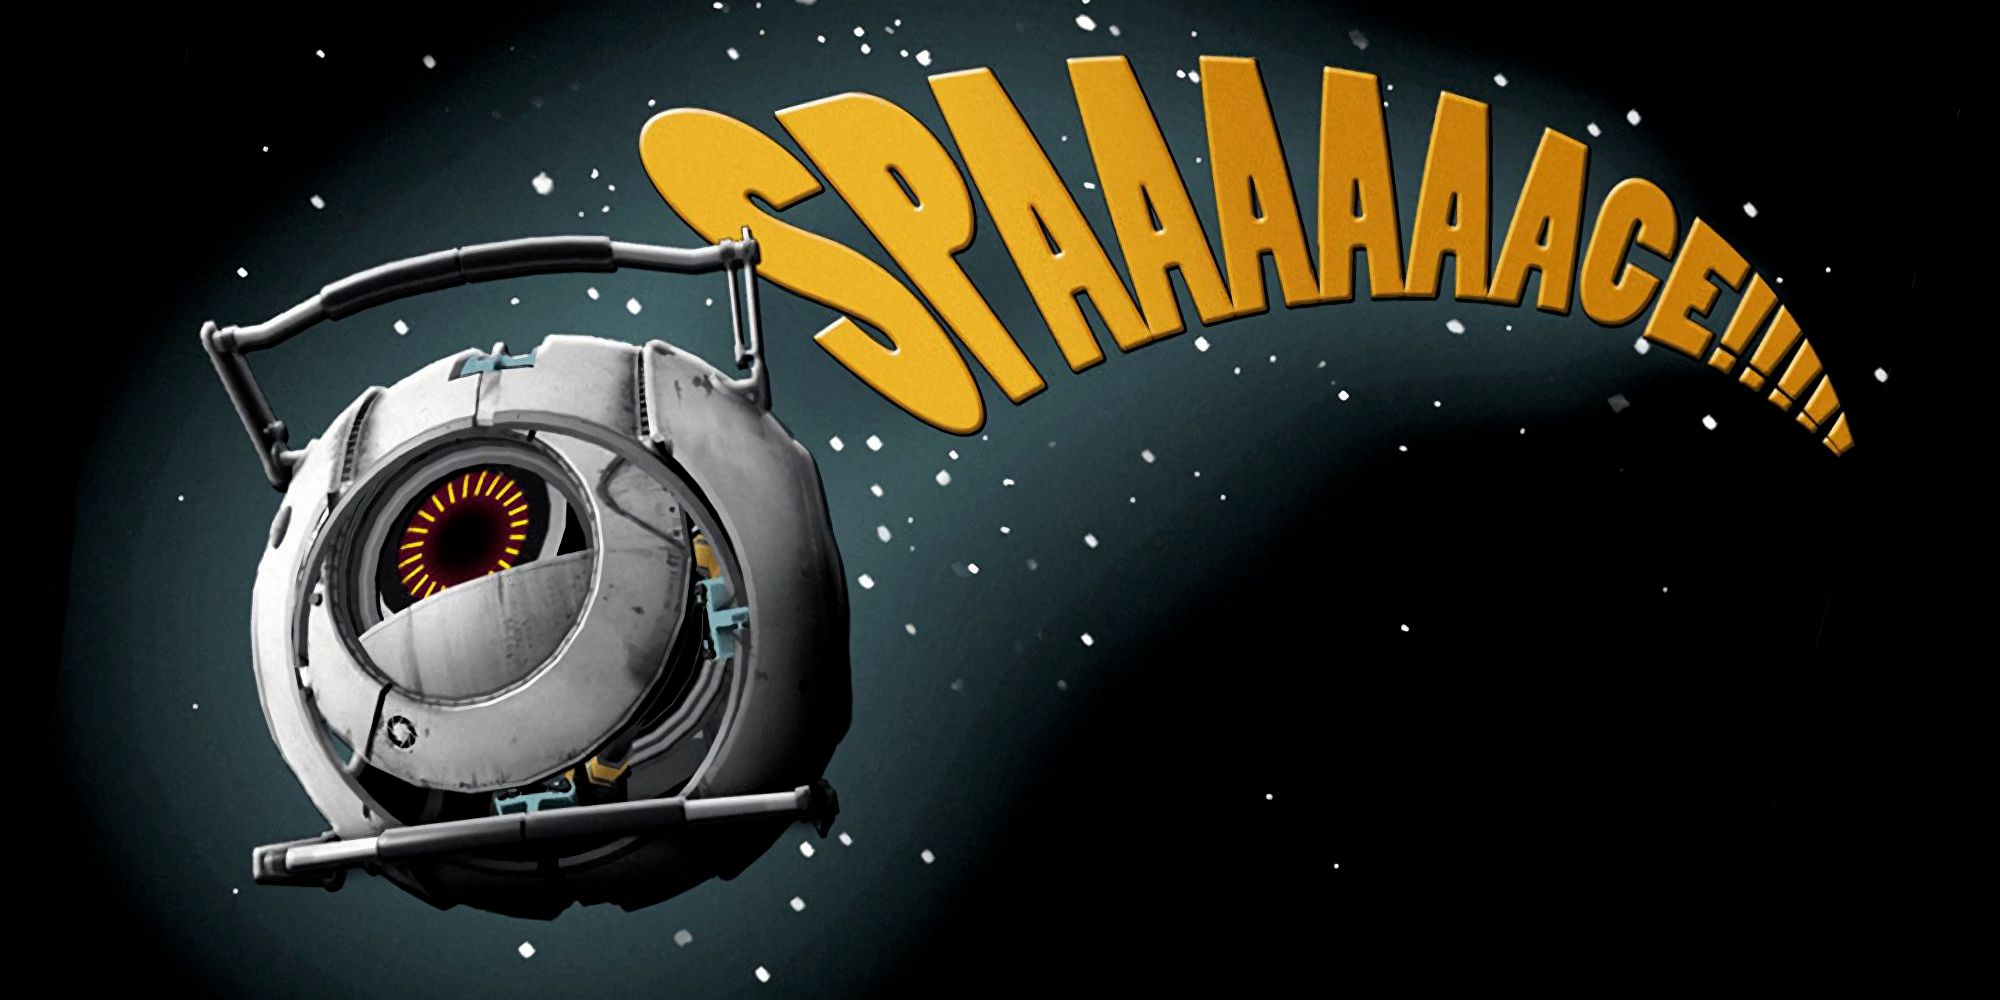 Promotional Still For Portal 2 Depicting Wheatley Saying "Space!!!"